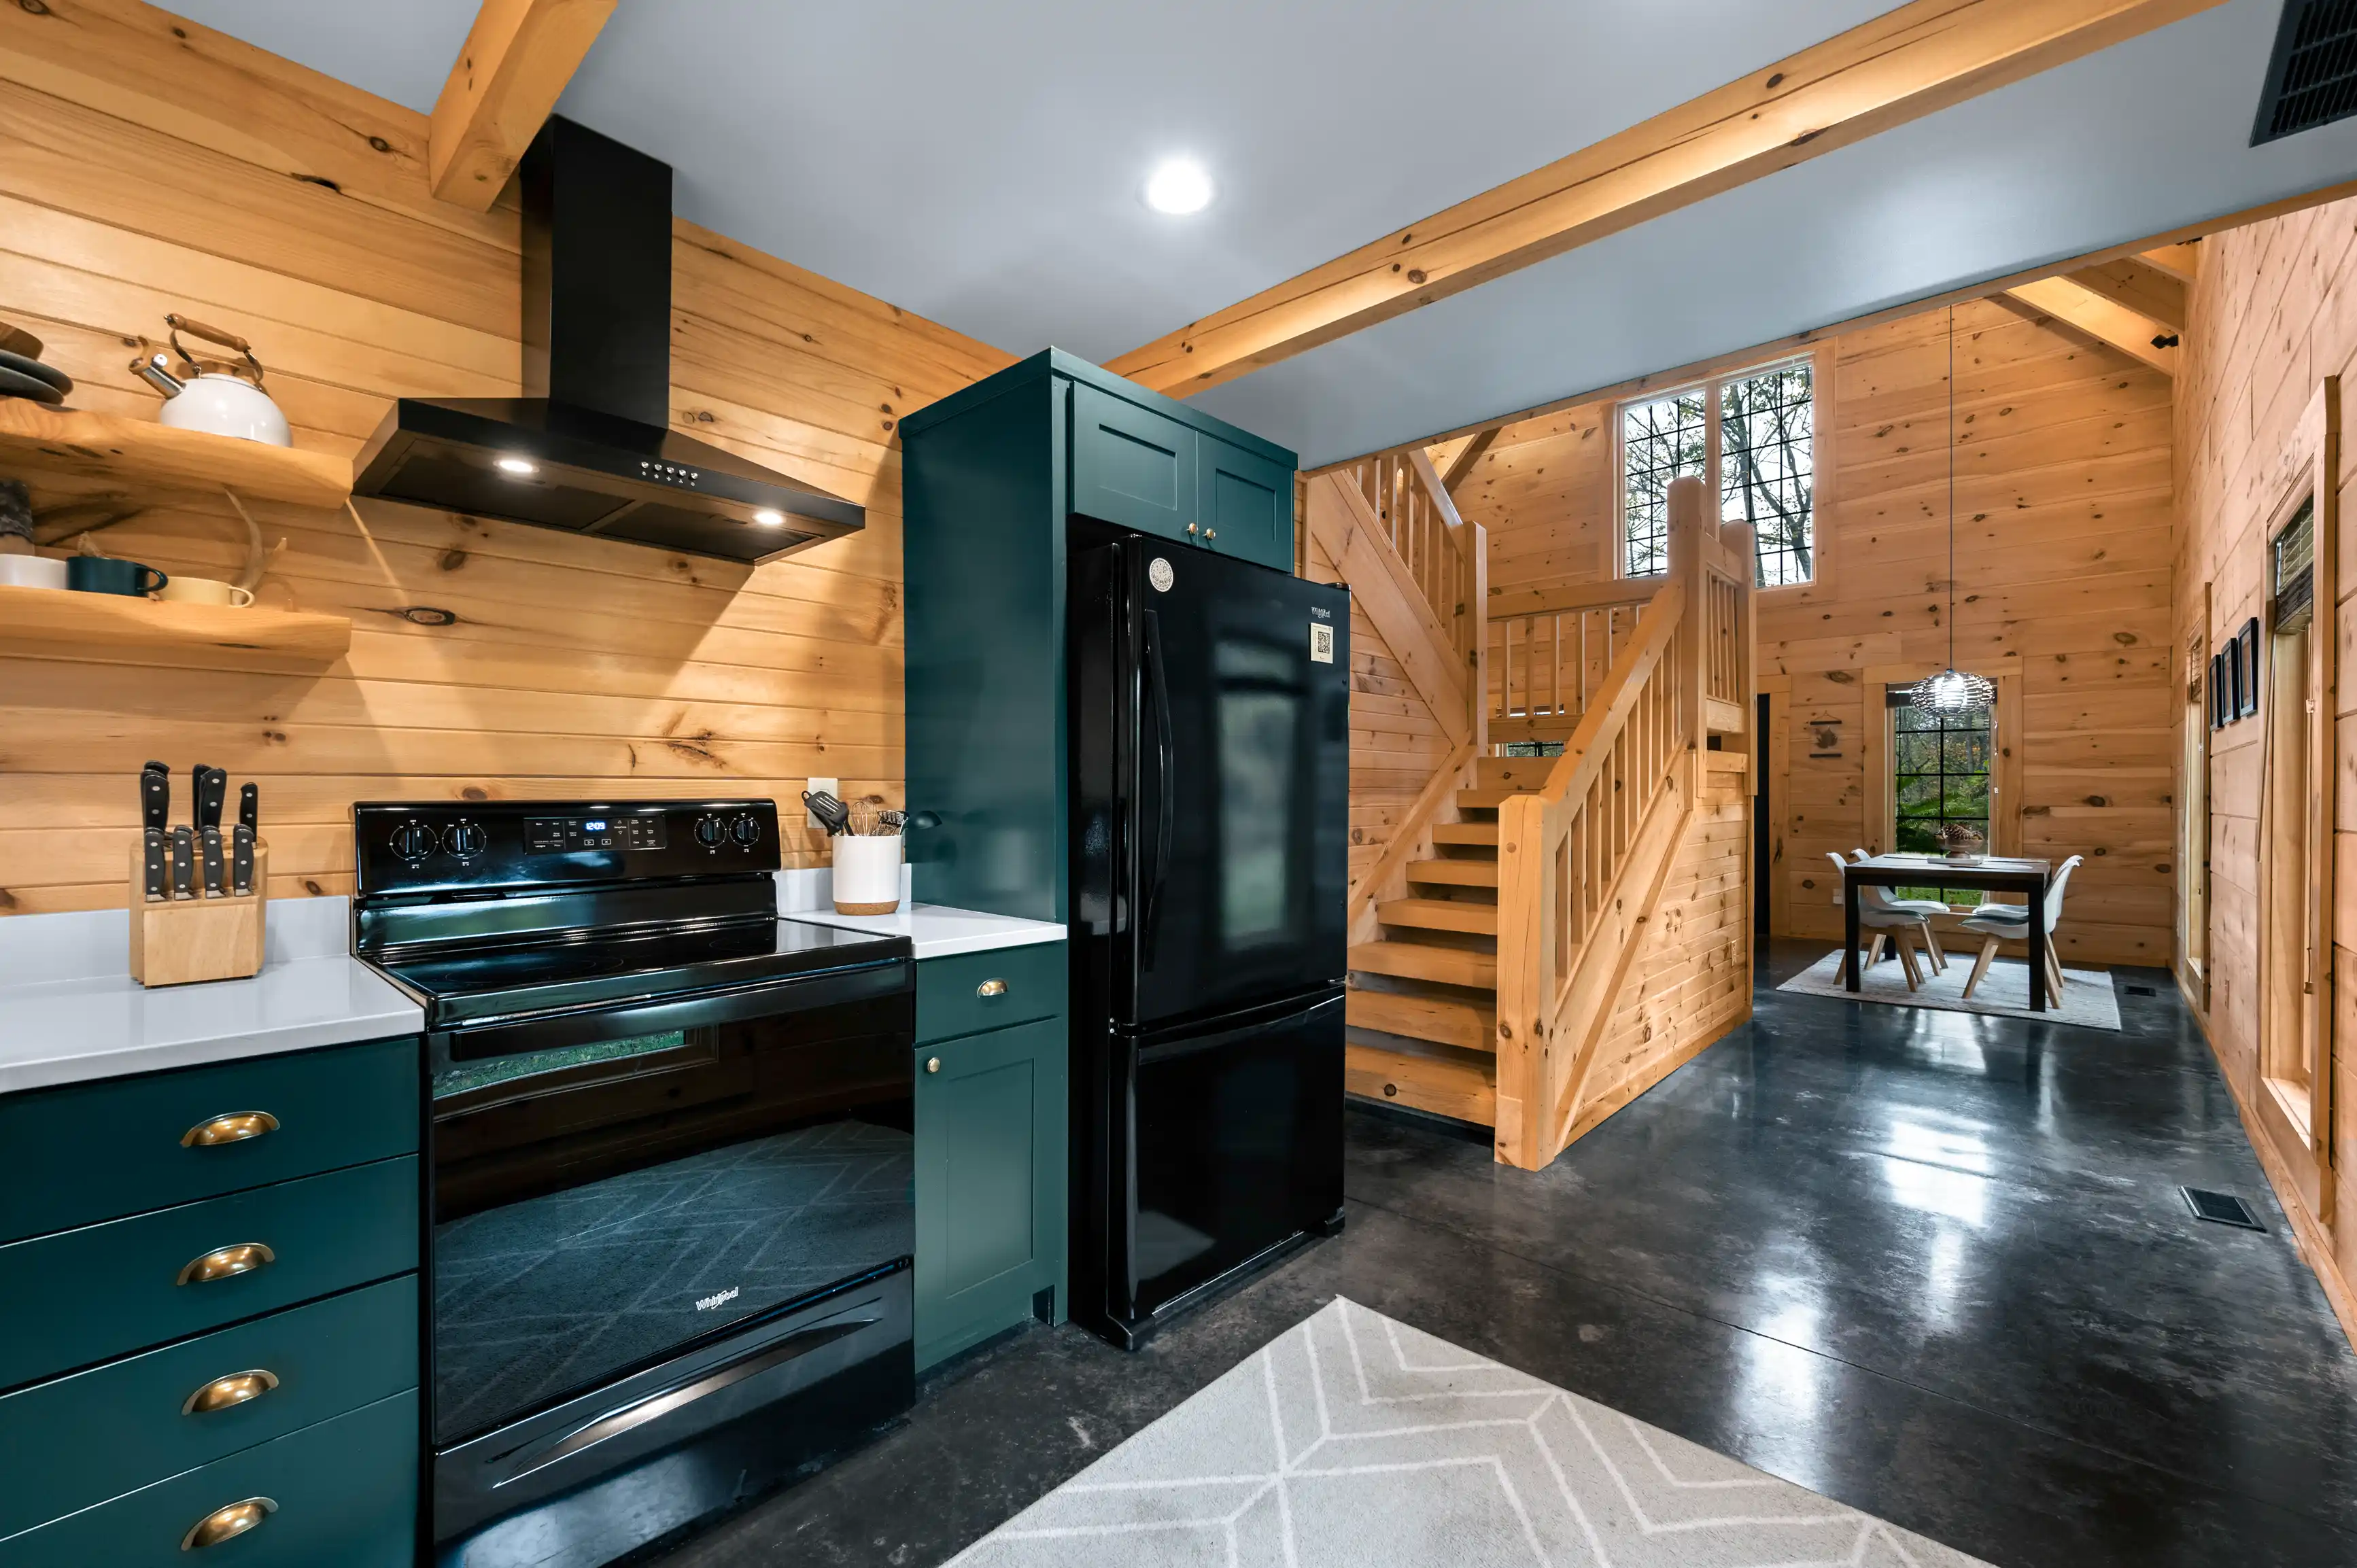 Modern kitchen interior with dark green cabinets and black appliances contrasted against natural wood walls and ceiling, featuring a staircase leading to an upper level.